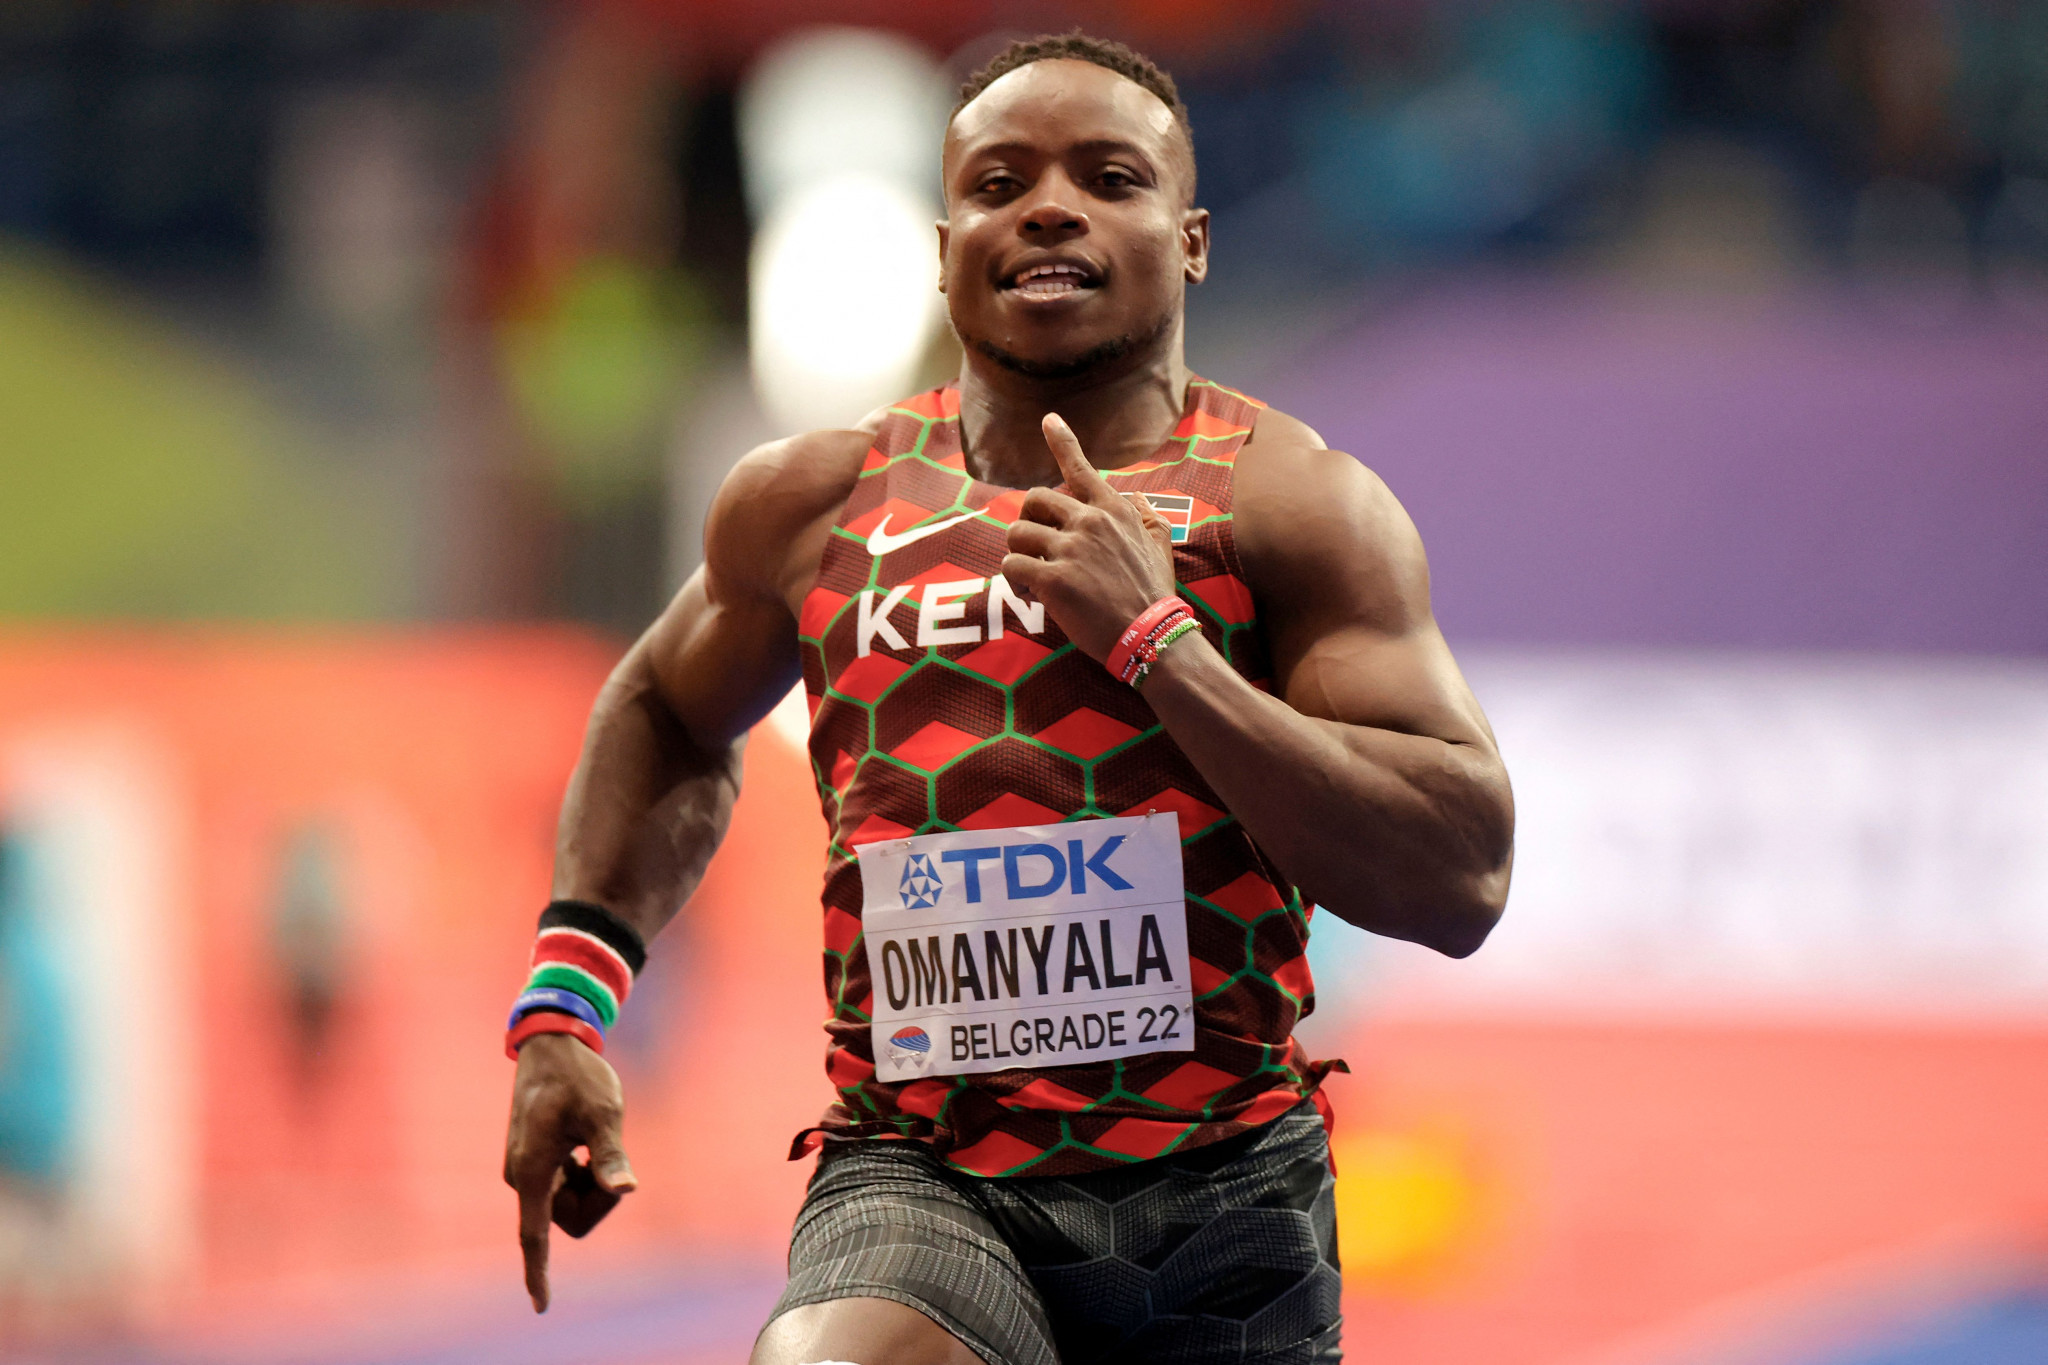 Kenya's Ferdinand Omanyala is the favourite for the men's 100m event at the African Athletics Championships ©Getty Images